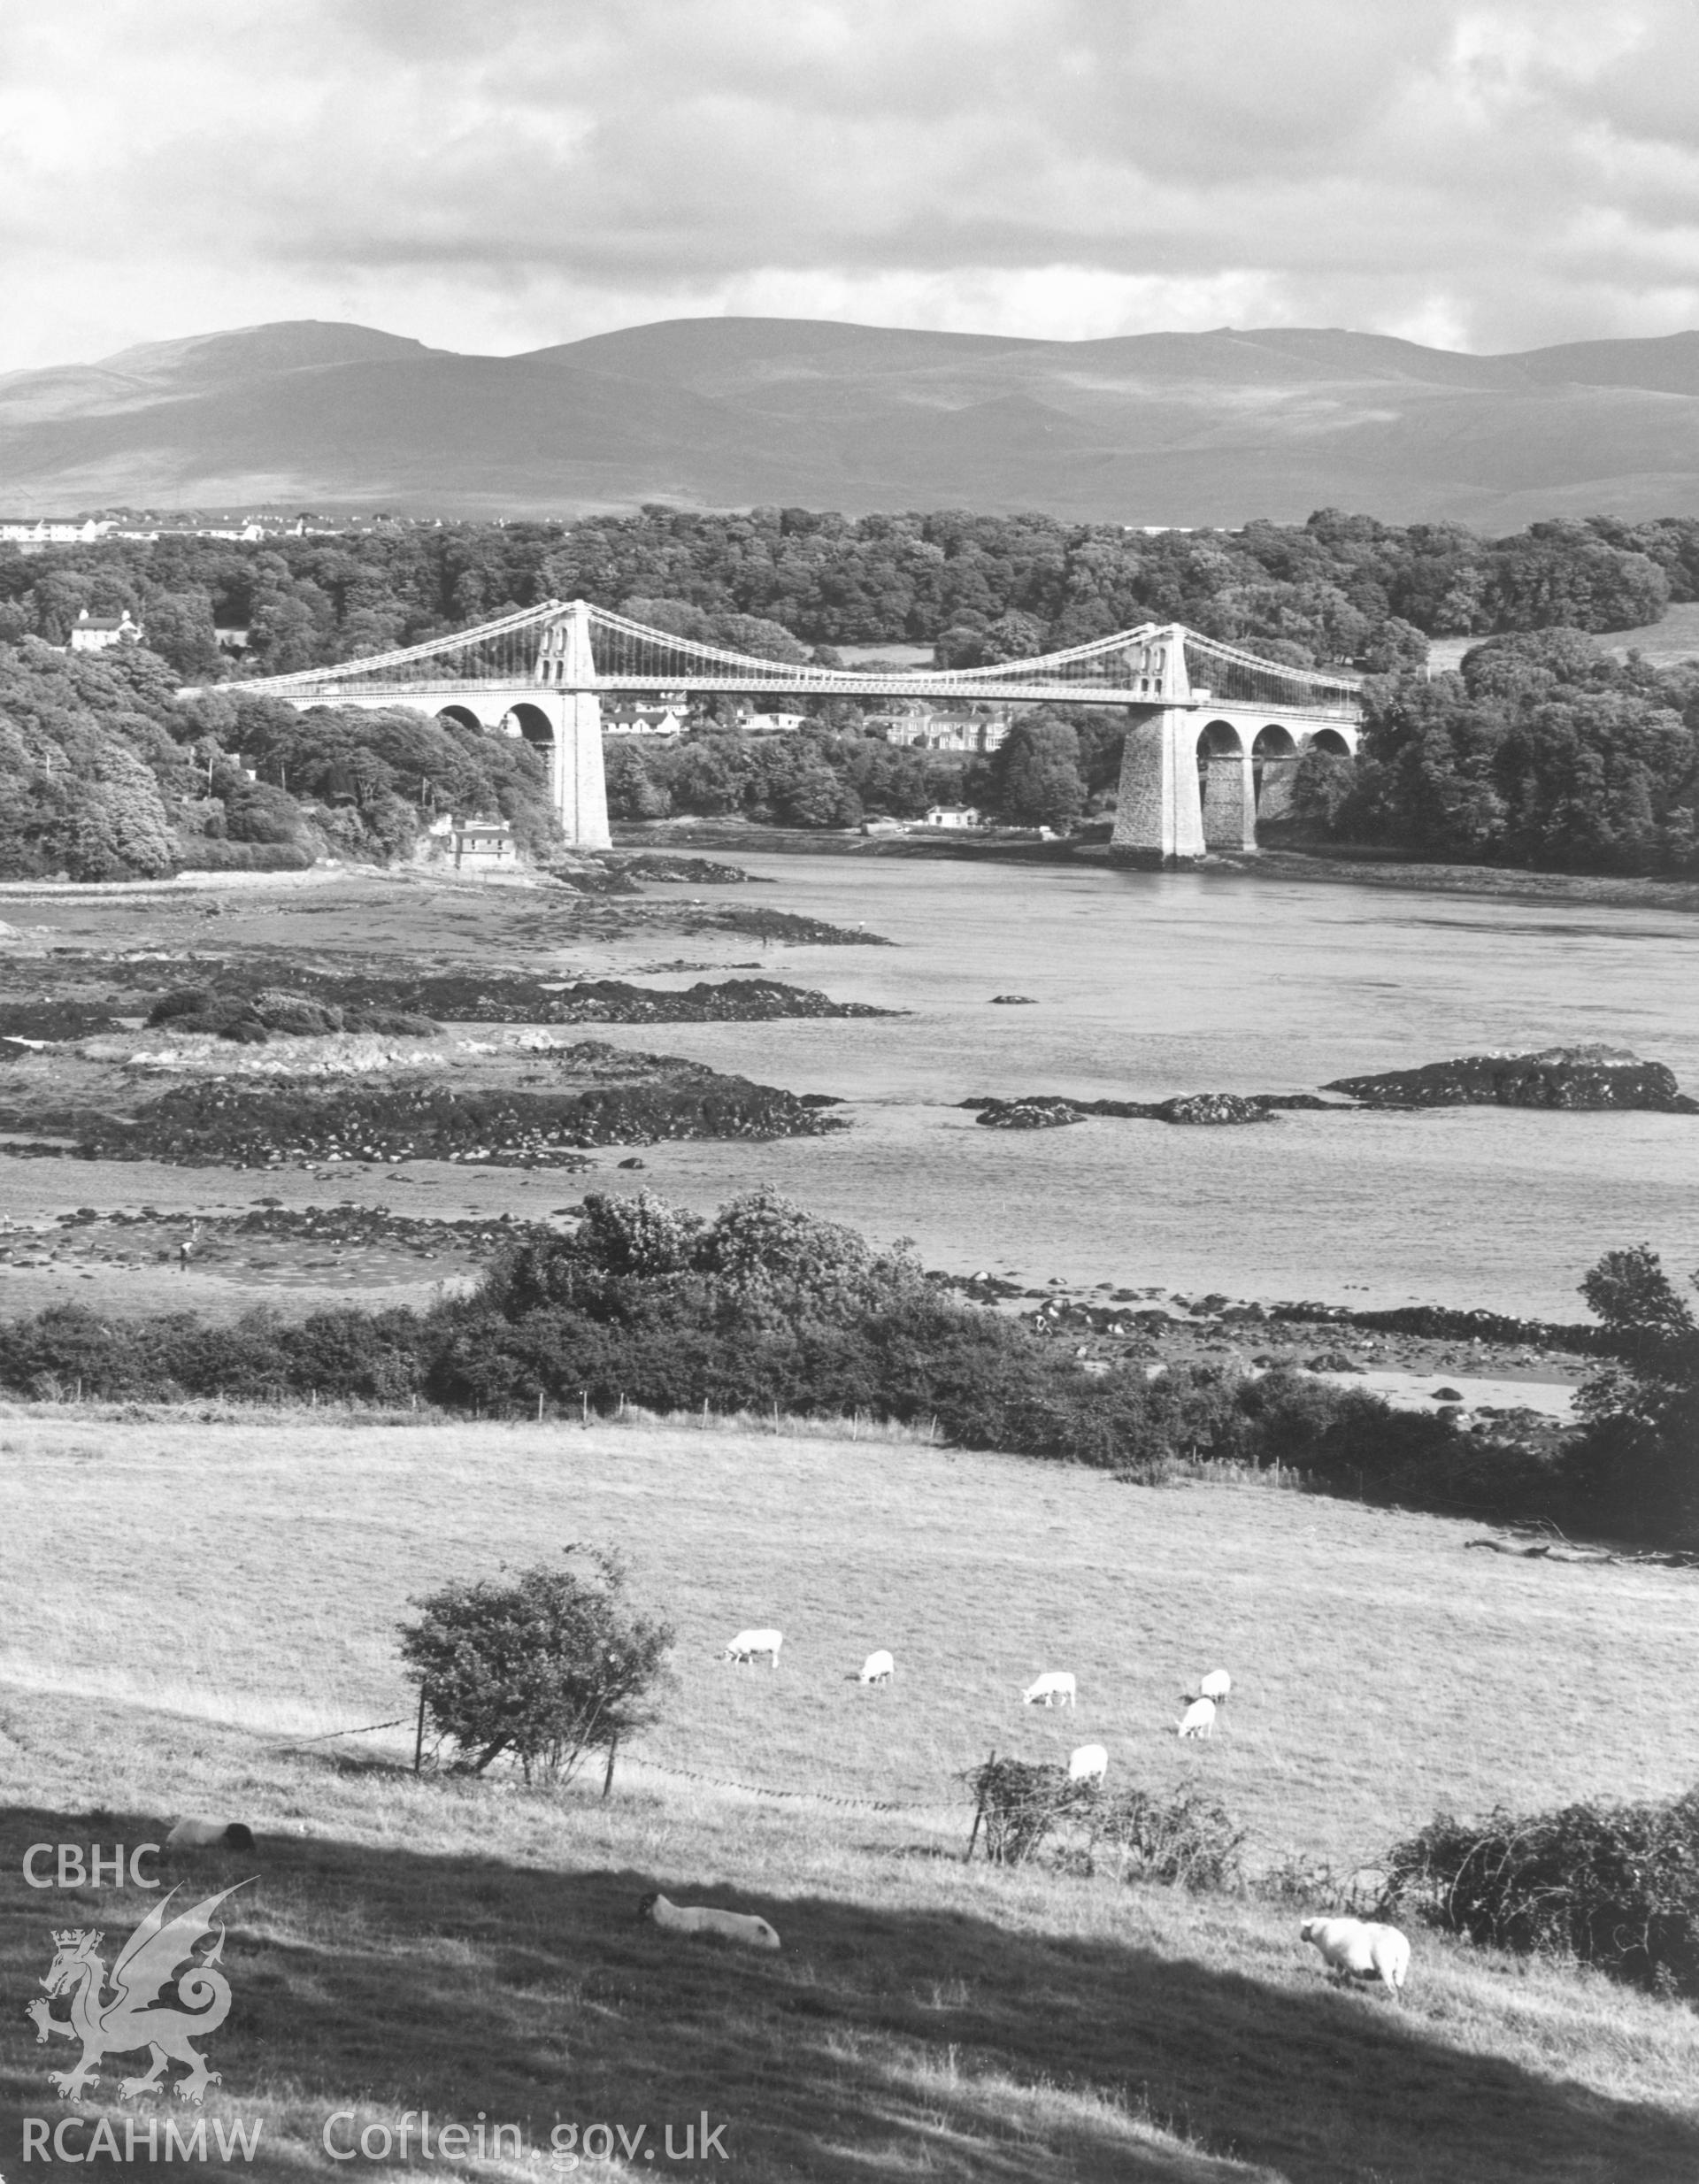 1 b/w print showing Menai suspension bridge (from Anglesey), collated by the former Central Office of Information.